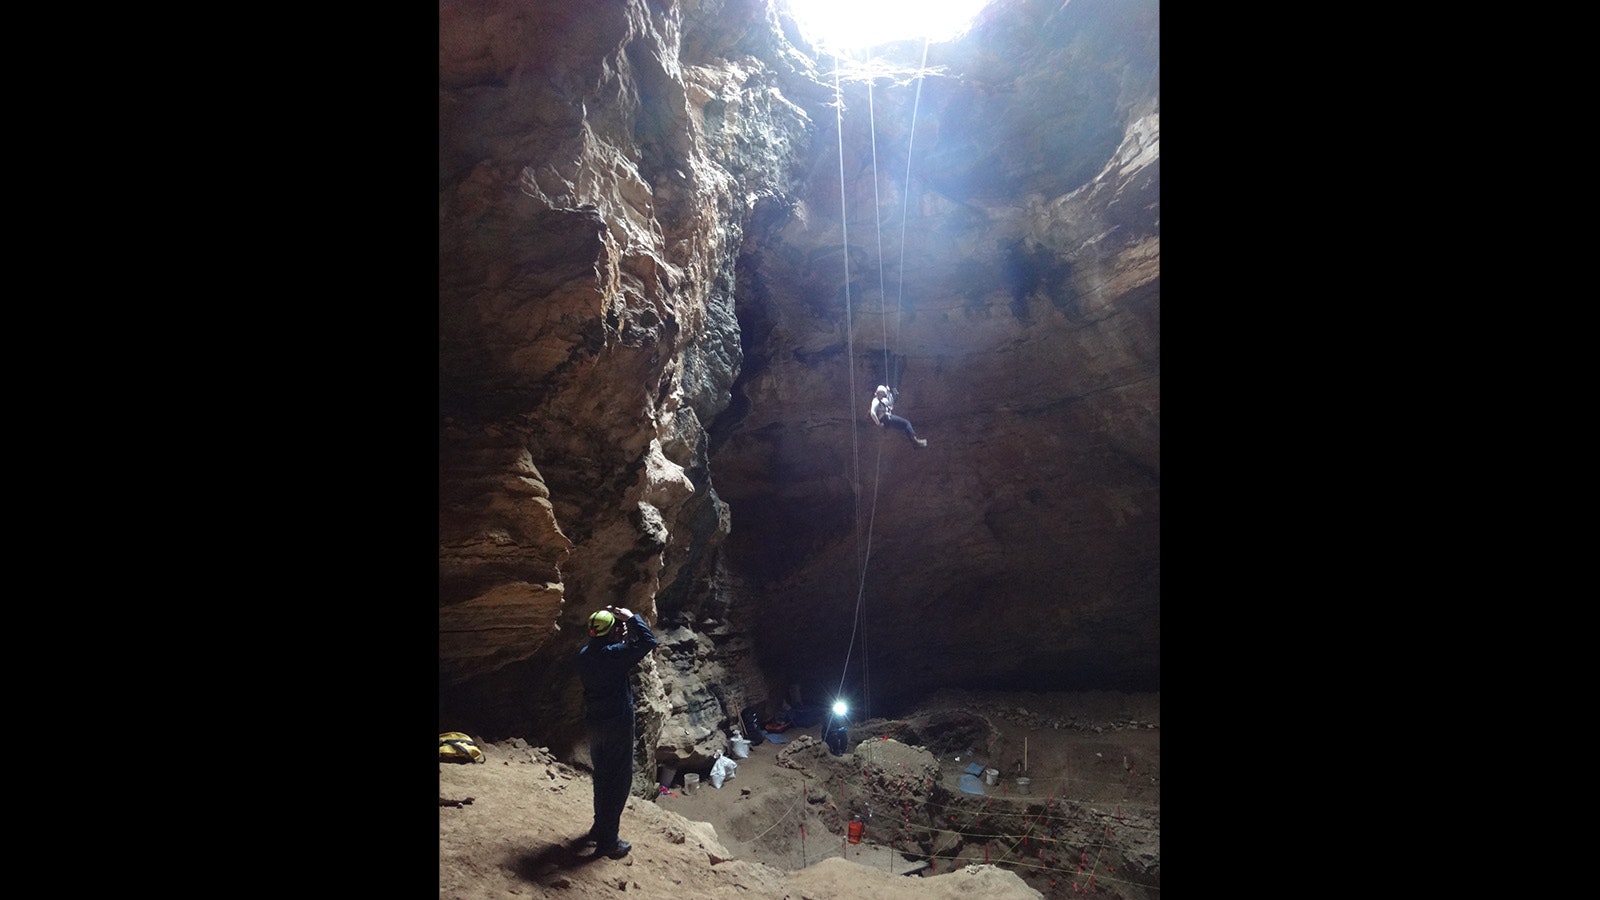 A group studies the depths of Natural Trap Cave in northern Wyoming.